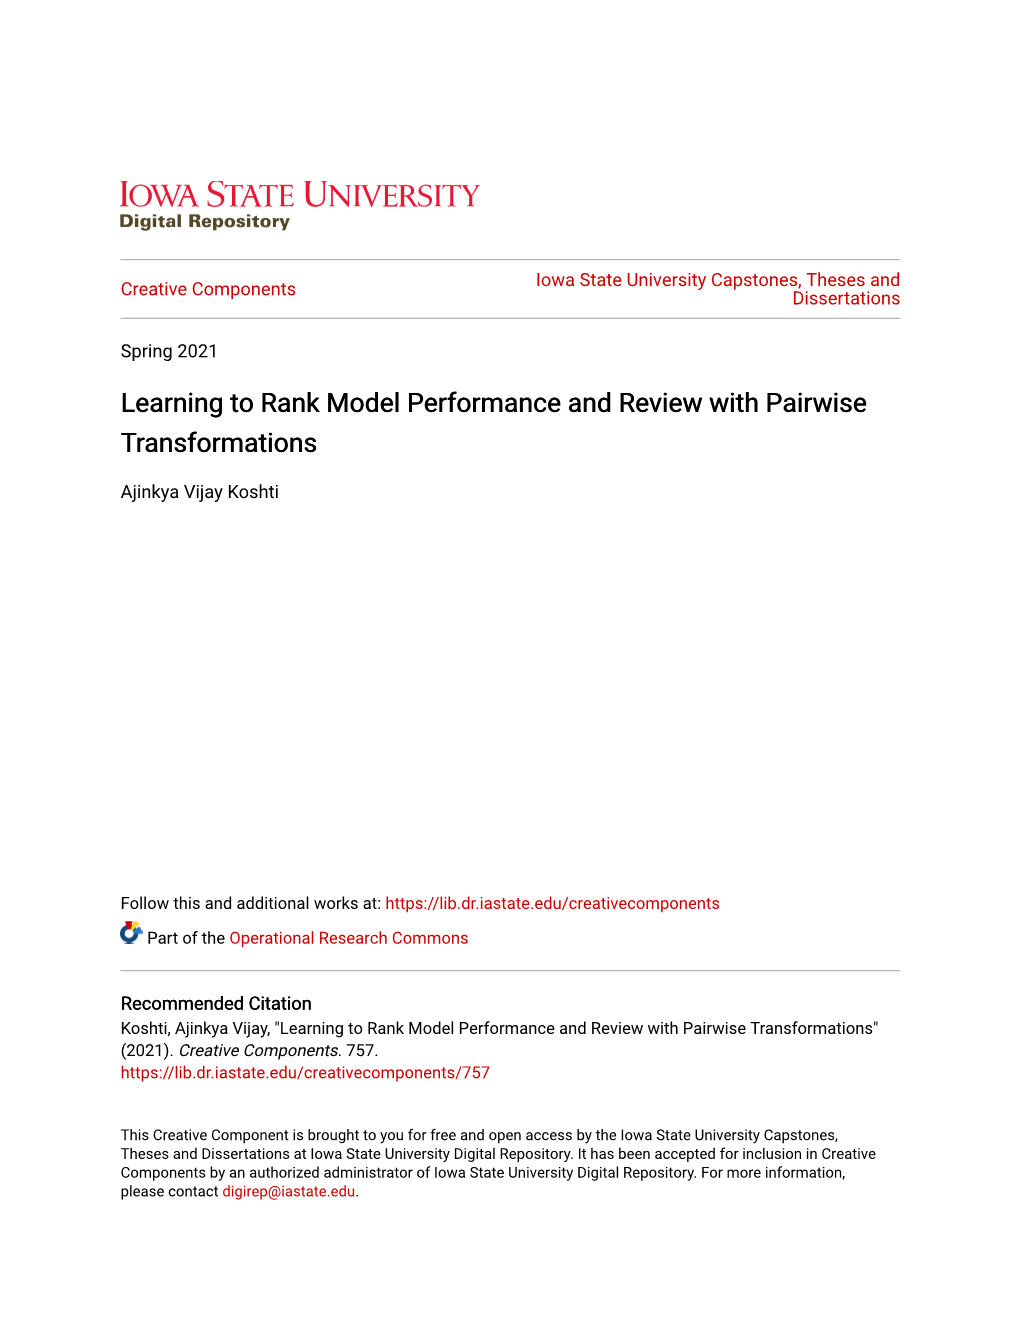 Learning to Rank Model Performance and Review with Pairwise Transformations